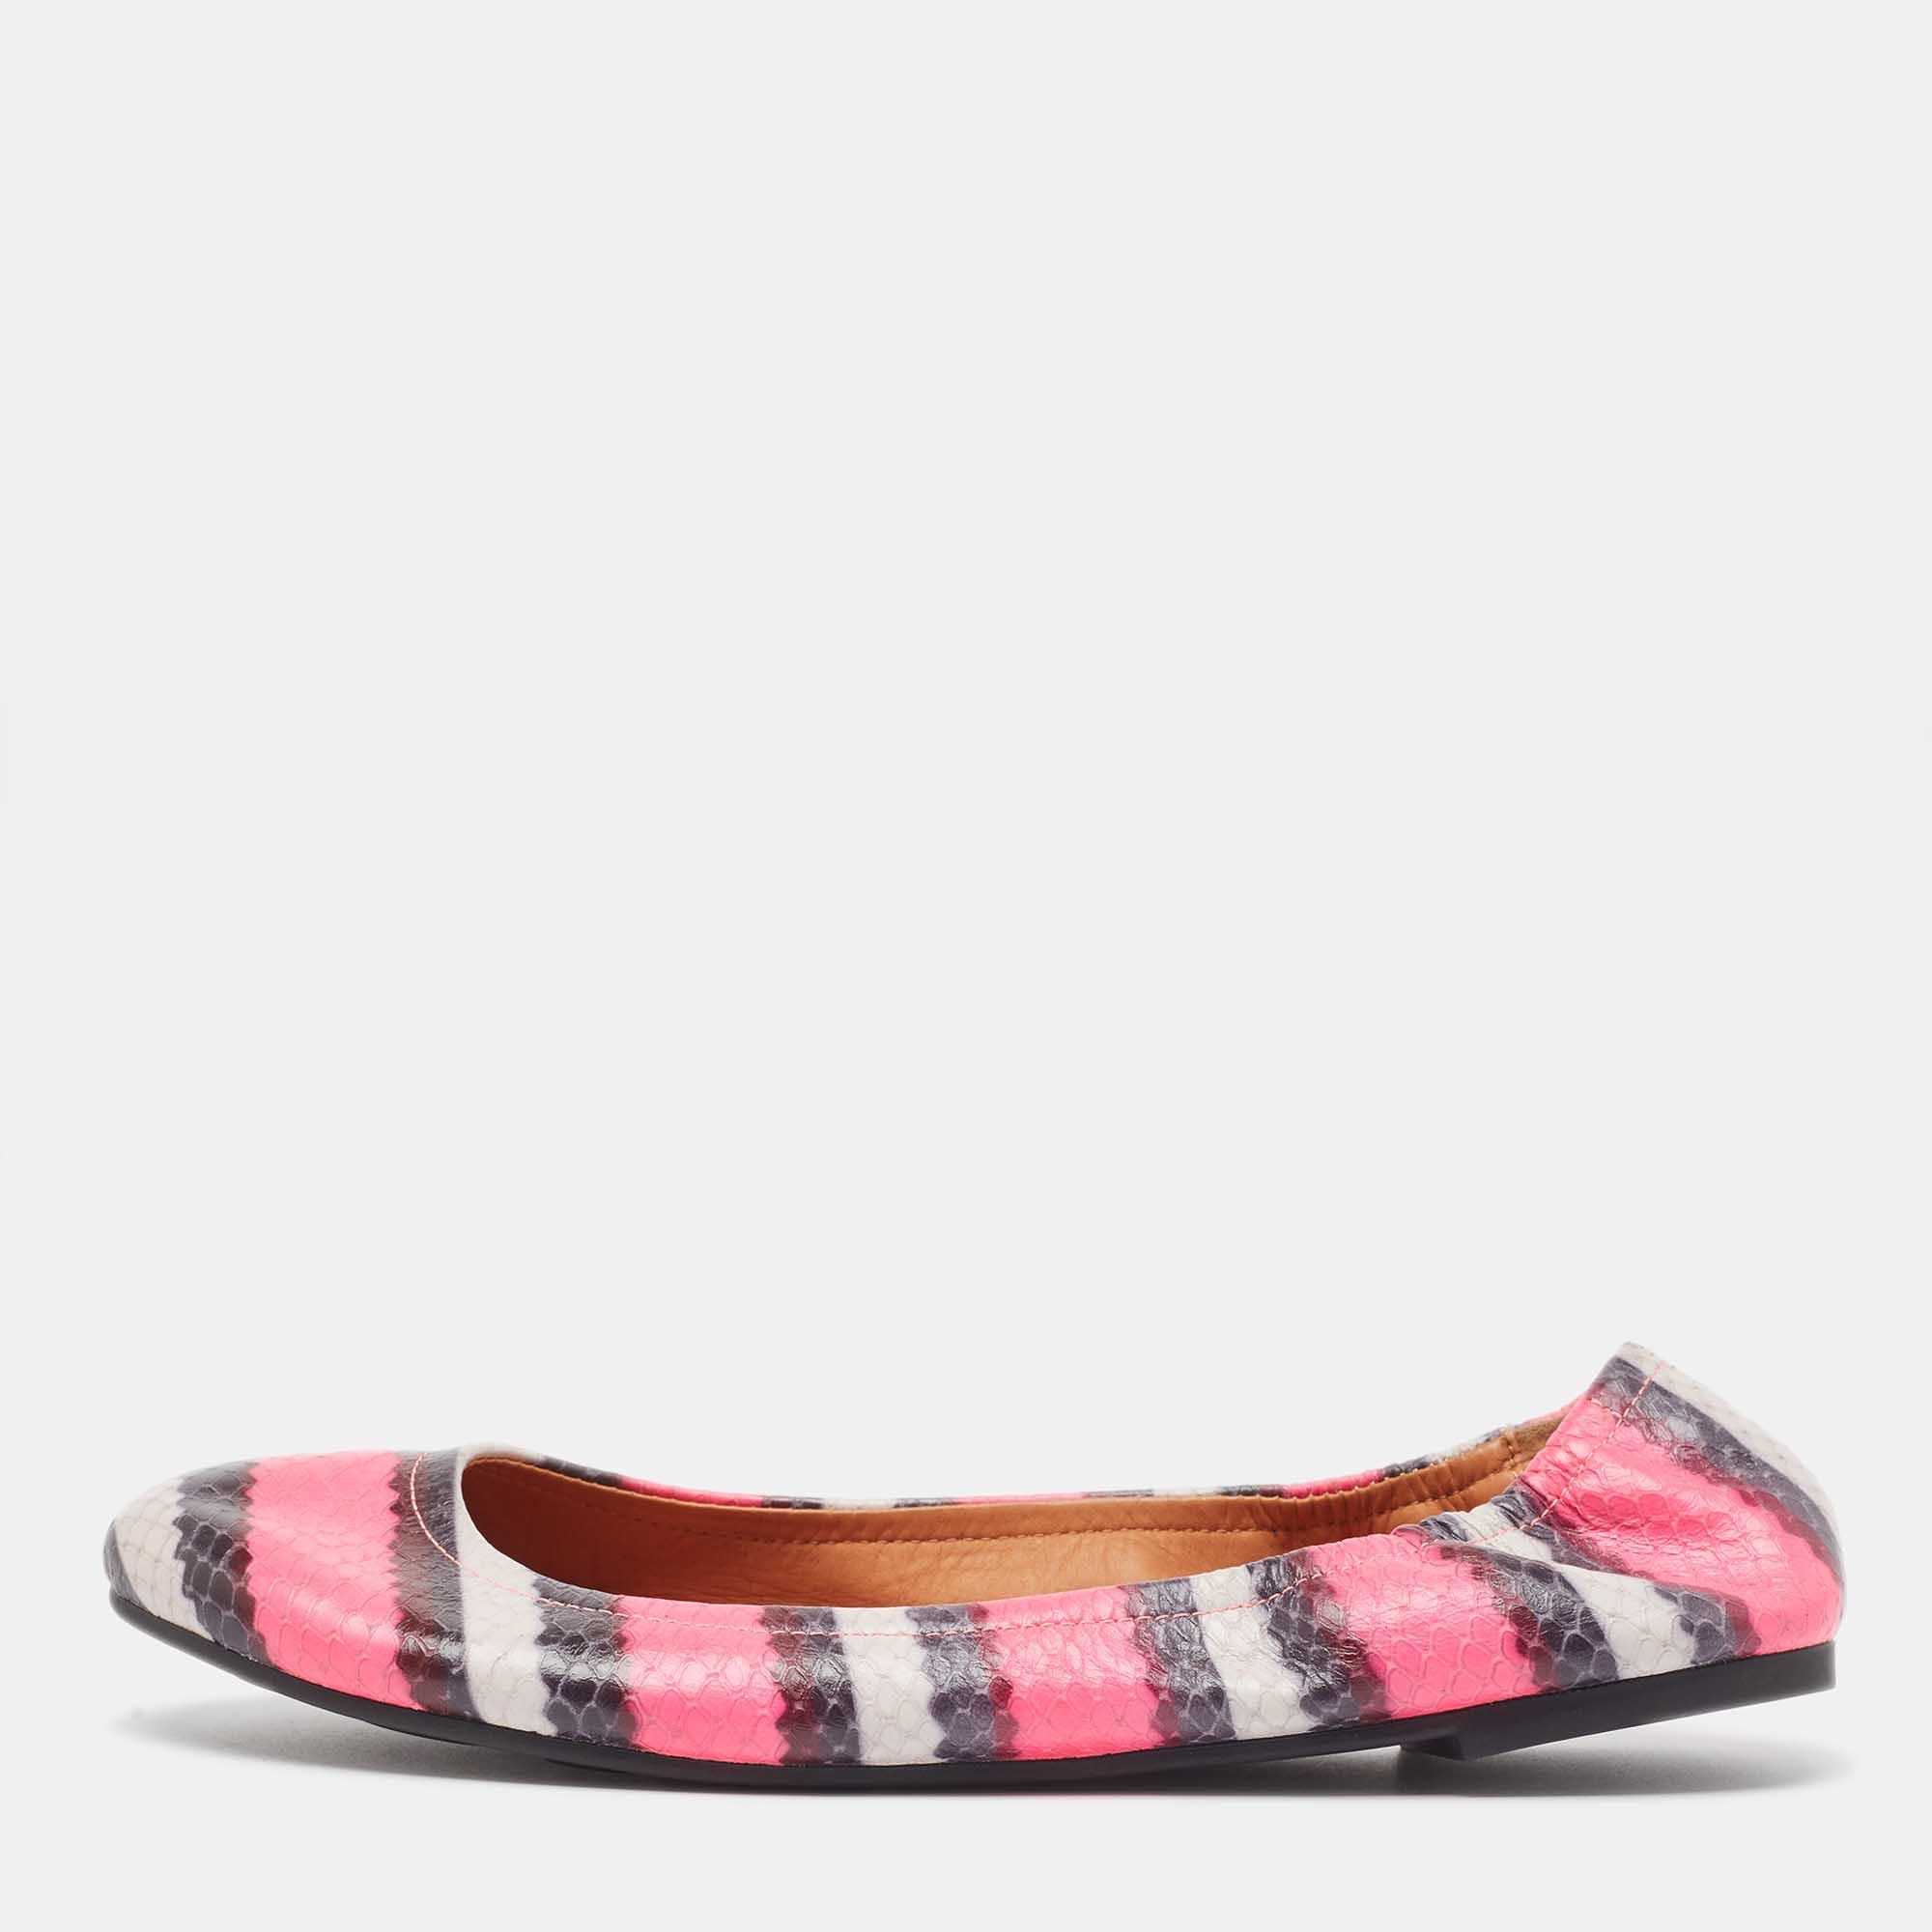 

Marc by Marc Jacobs Tricolor Embossed Python Ballet Flats Size, Pink